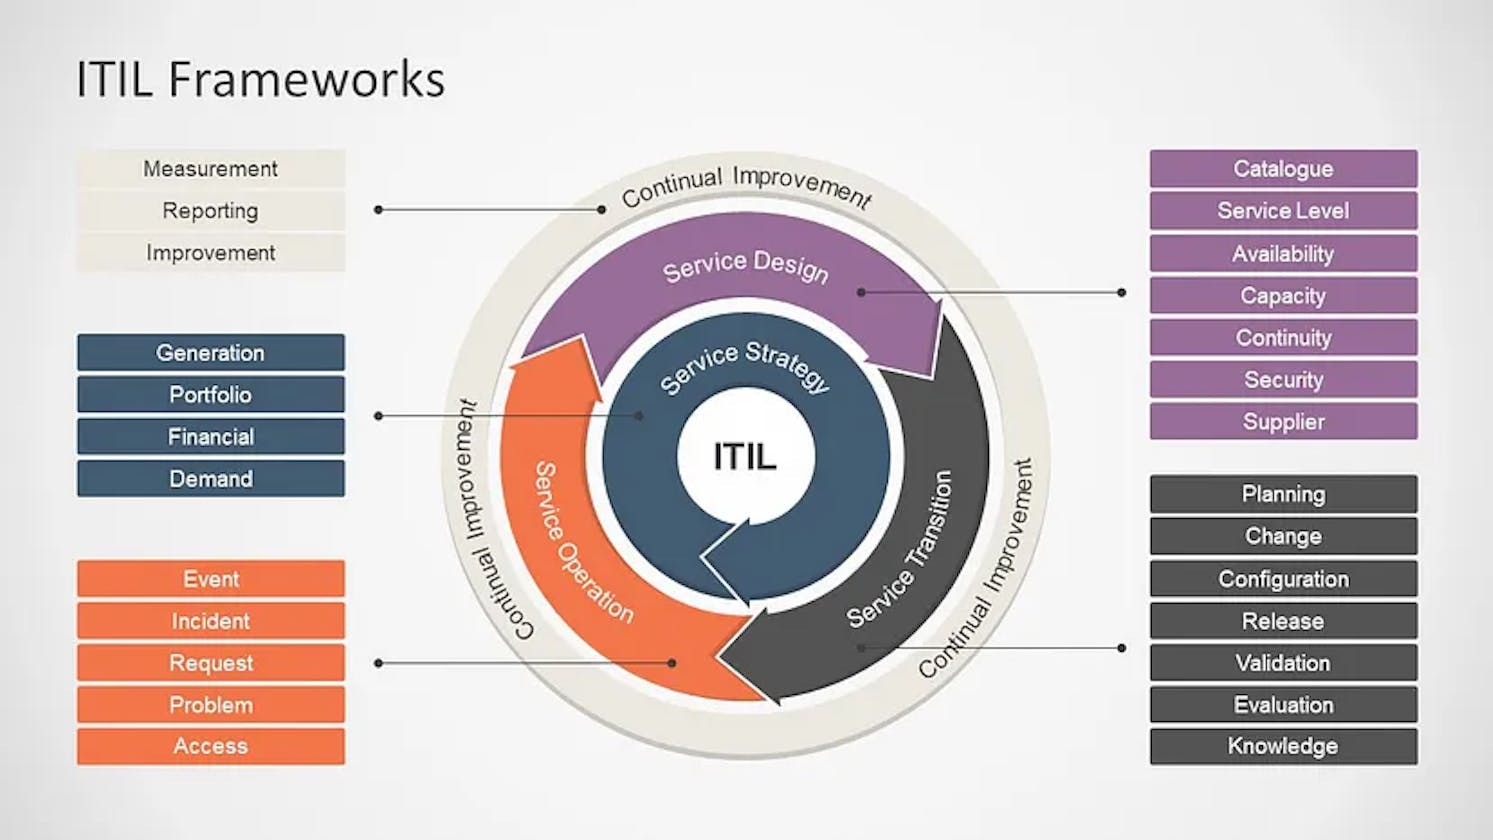 An In-Depth Guide to ITIL: Understanding the IT Infrastructure Library